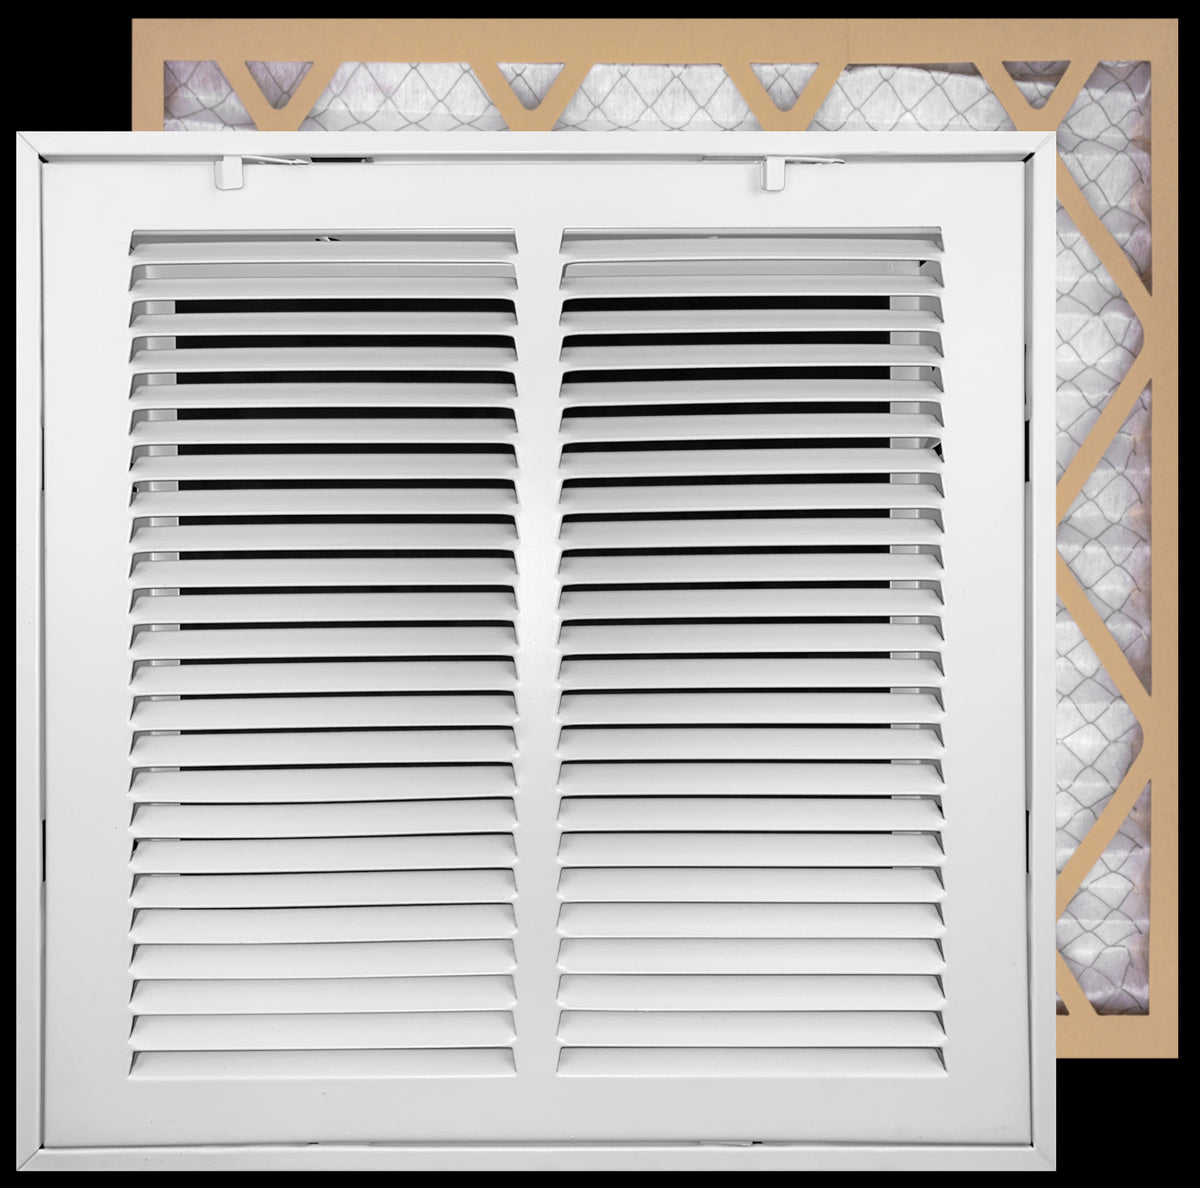 airgrilles 14" x 14" duct opening  -  filter included hd steel return air filter grille for sidewall and ceiling fil-7rafg1-wh-14x14 038775643856 - 1